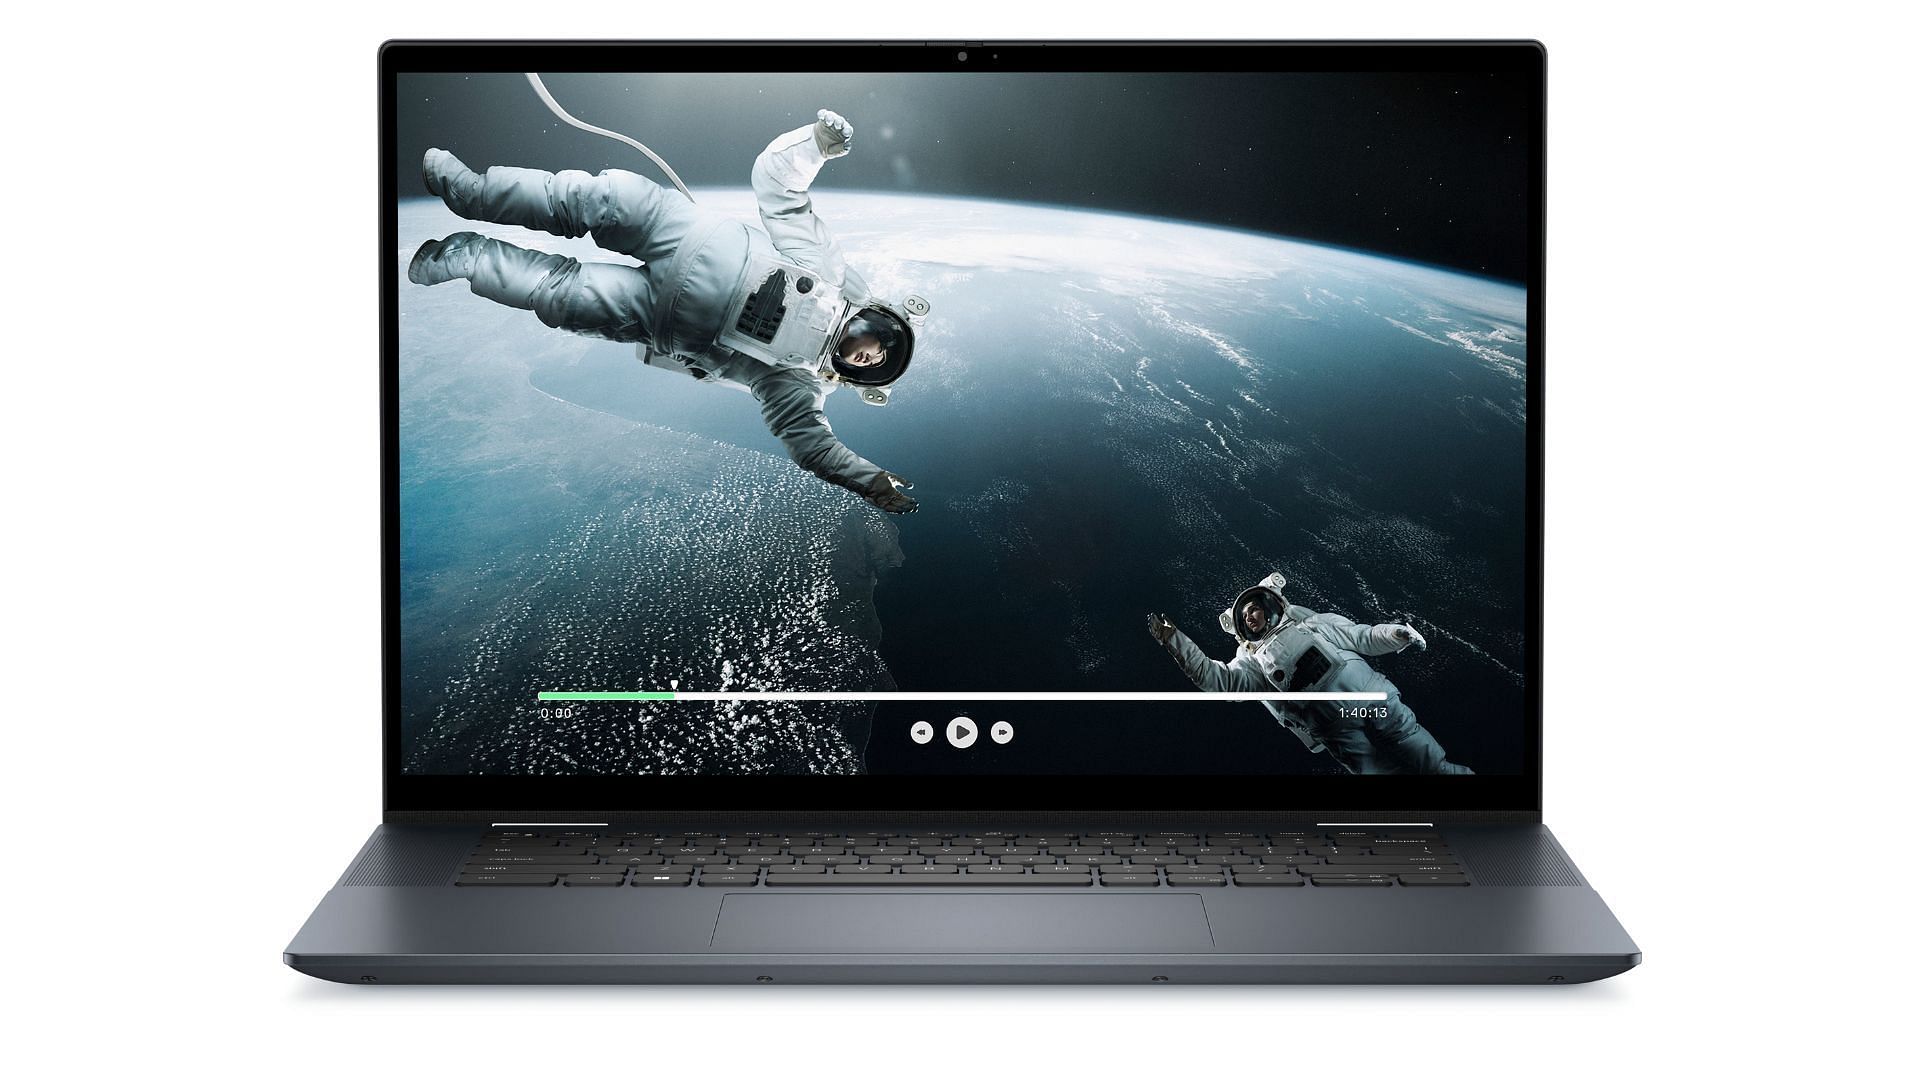 Dell Inspiron 16 2-in-1 is one of the best laptops with integrated graphics in 2-in-1 category (Image via Dell)